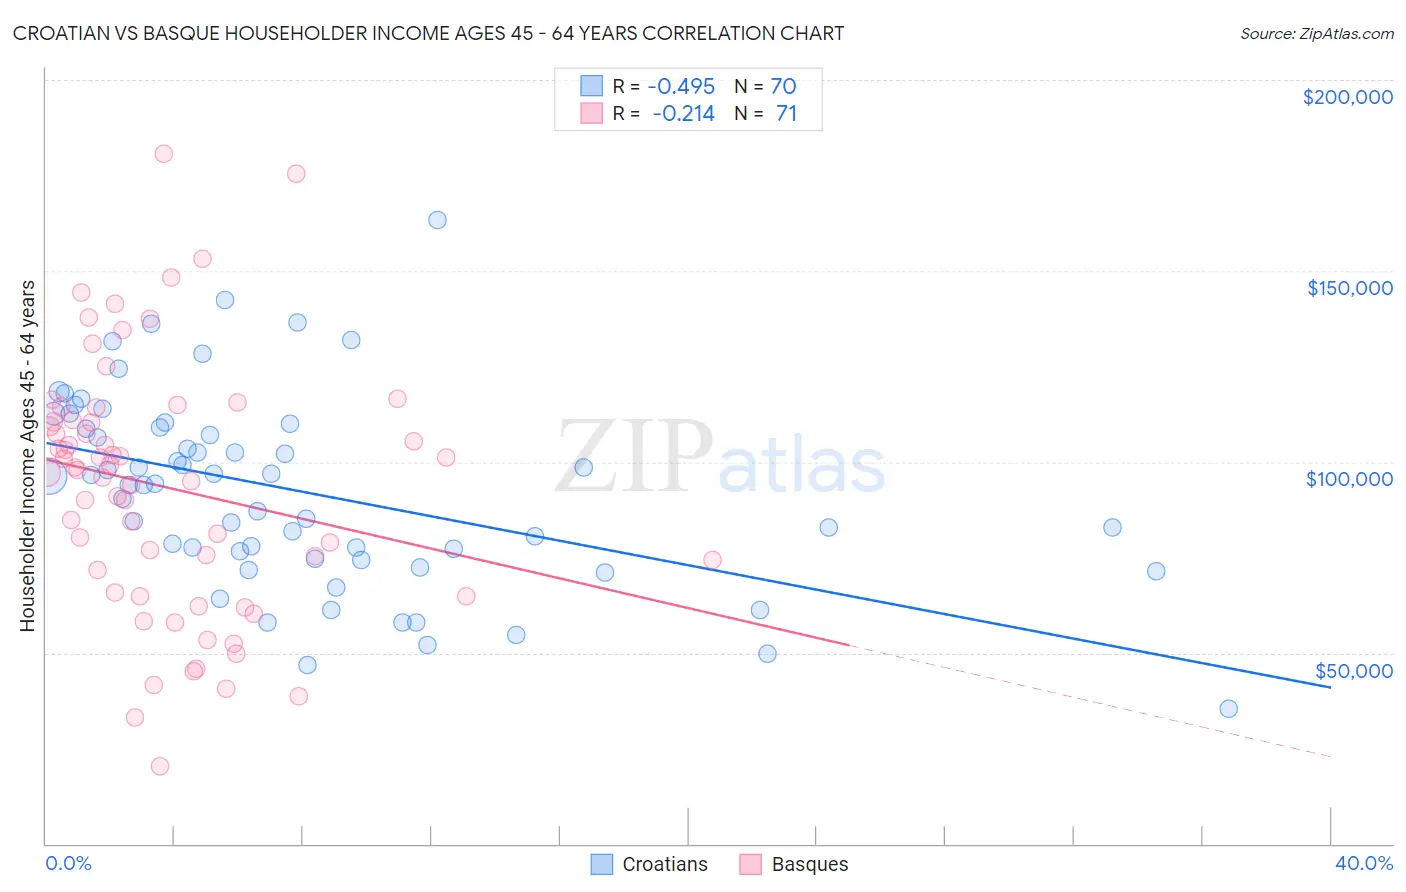 Croatian vs Basque Householder Income Ages 45 - 64 years